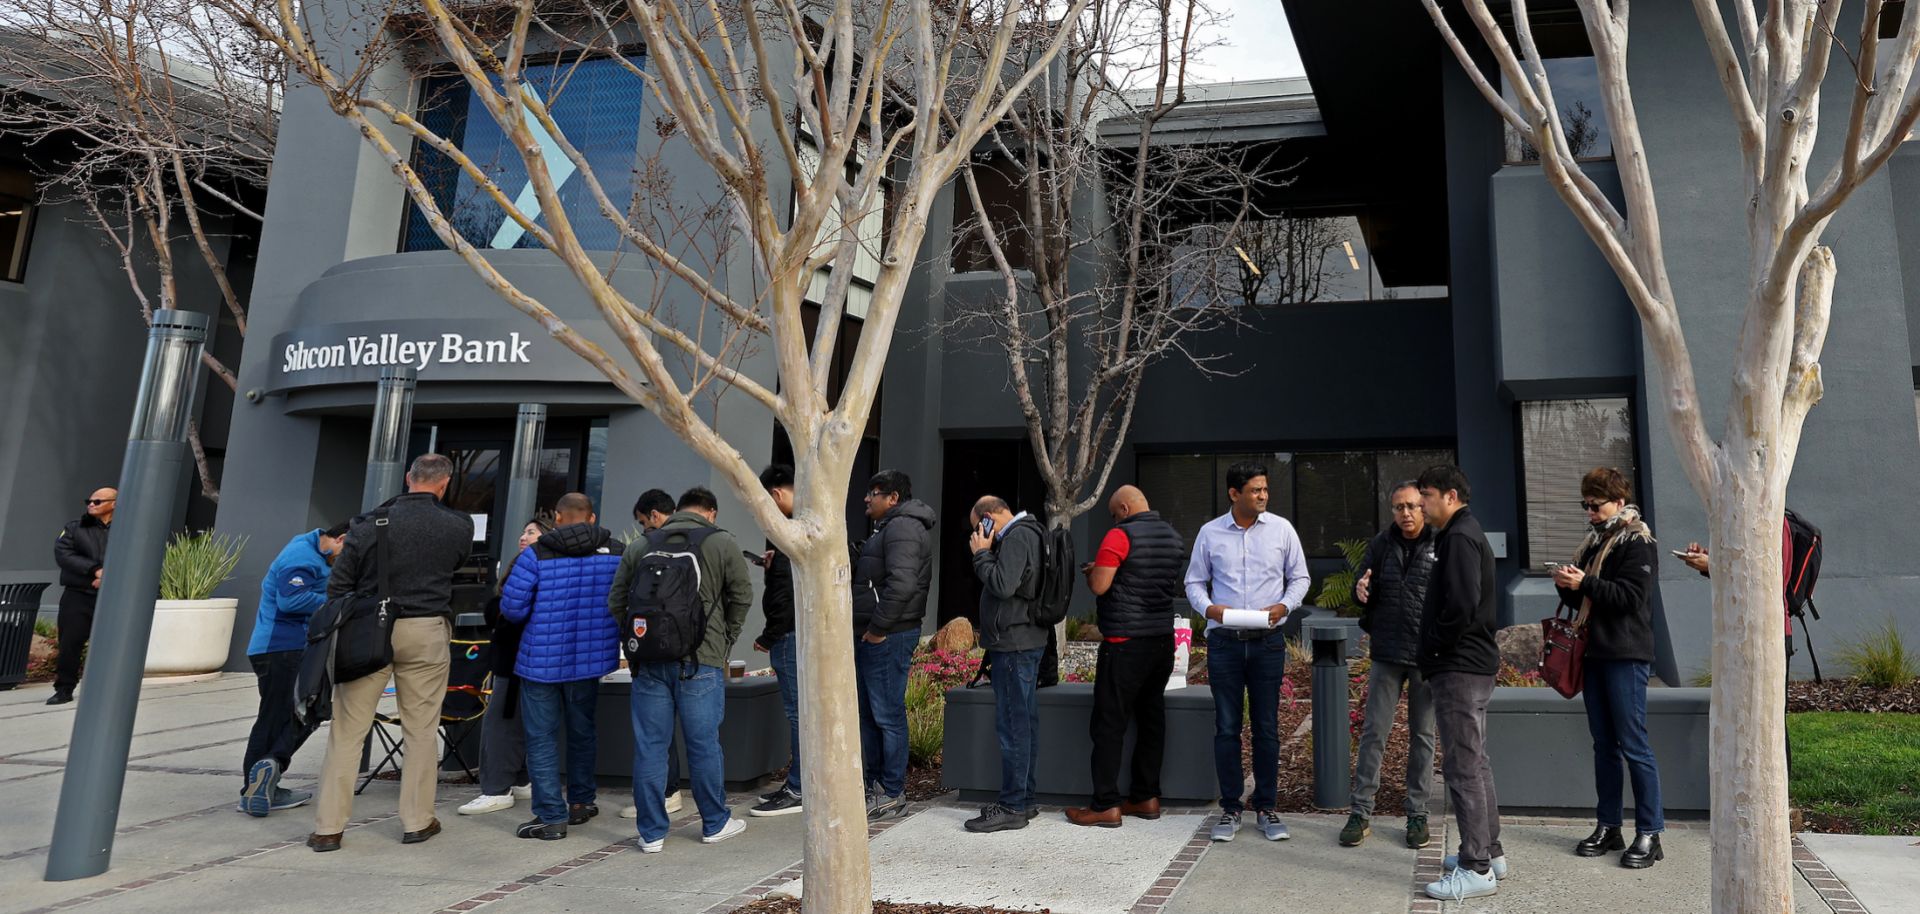 People seeking to retrieve their funds from the failed Silicon Valley Bank line up outside of the bank's offices in Santa Clara, California, on March 13, 2023.